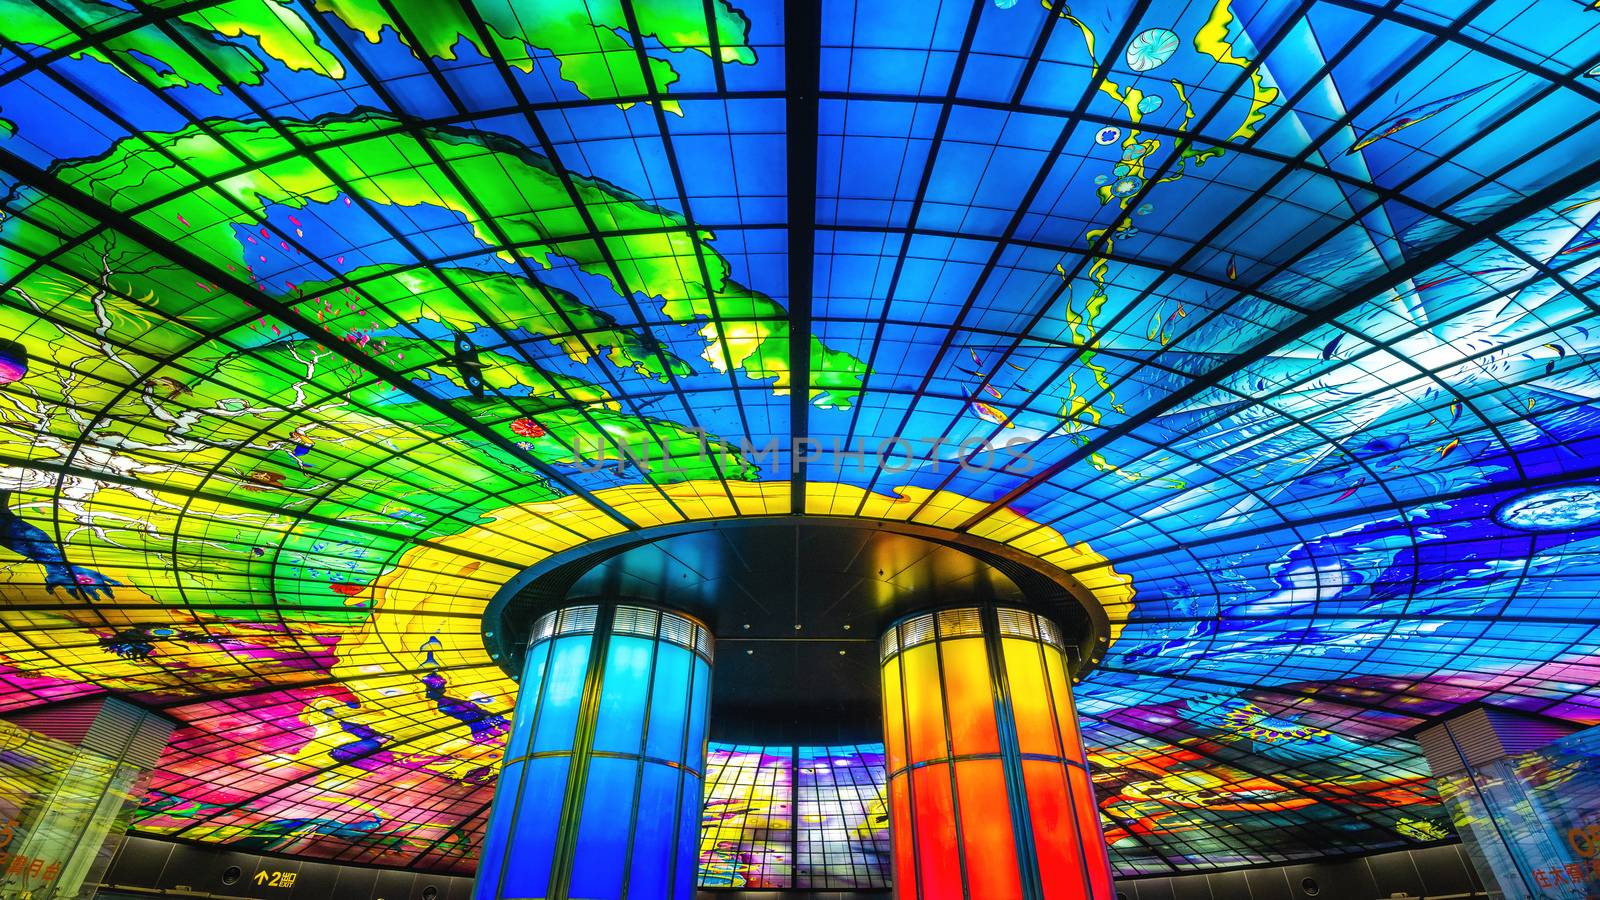 The Dome of light at formosa boulevard station in Kaohsiung city in Taiwan. by gutarphotoghaphy